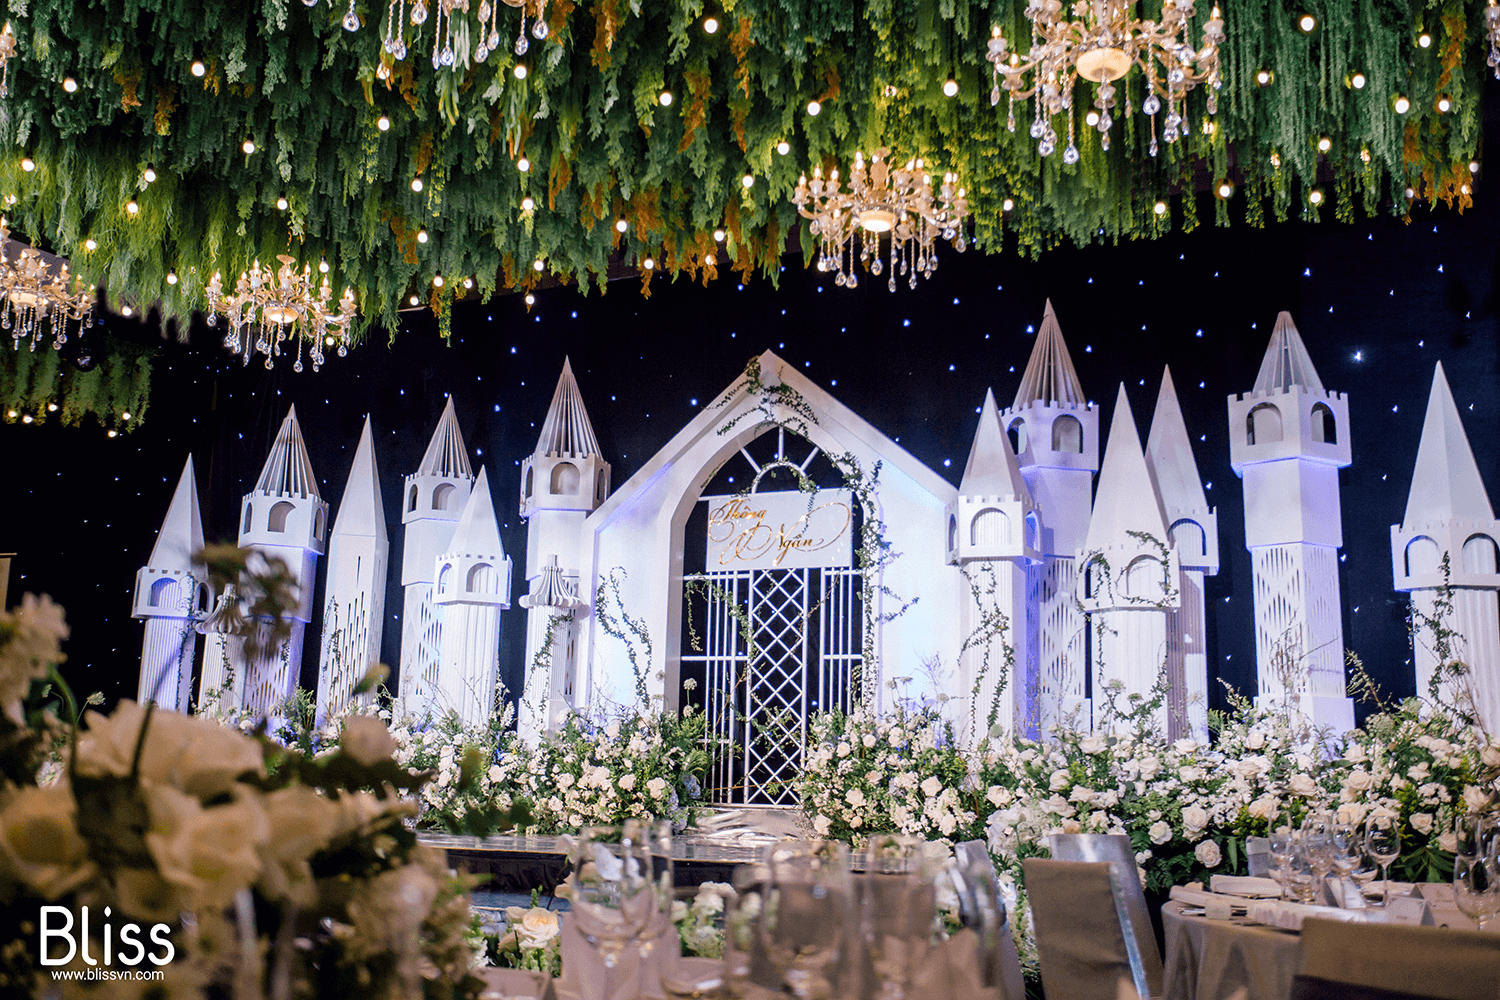 REAL WEDDING: Land Of Green Ginger – White Castle in Green Land